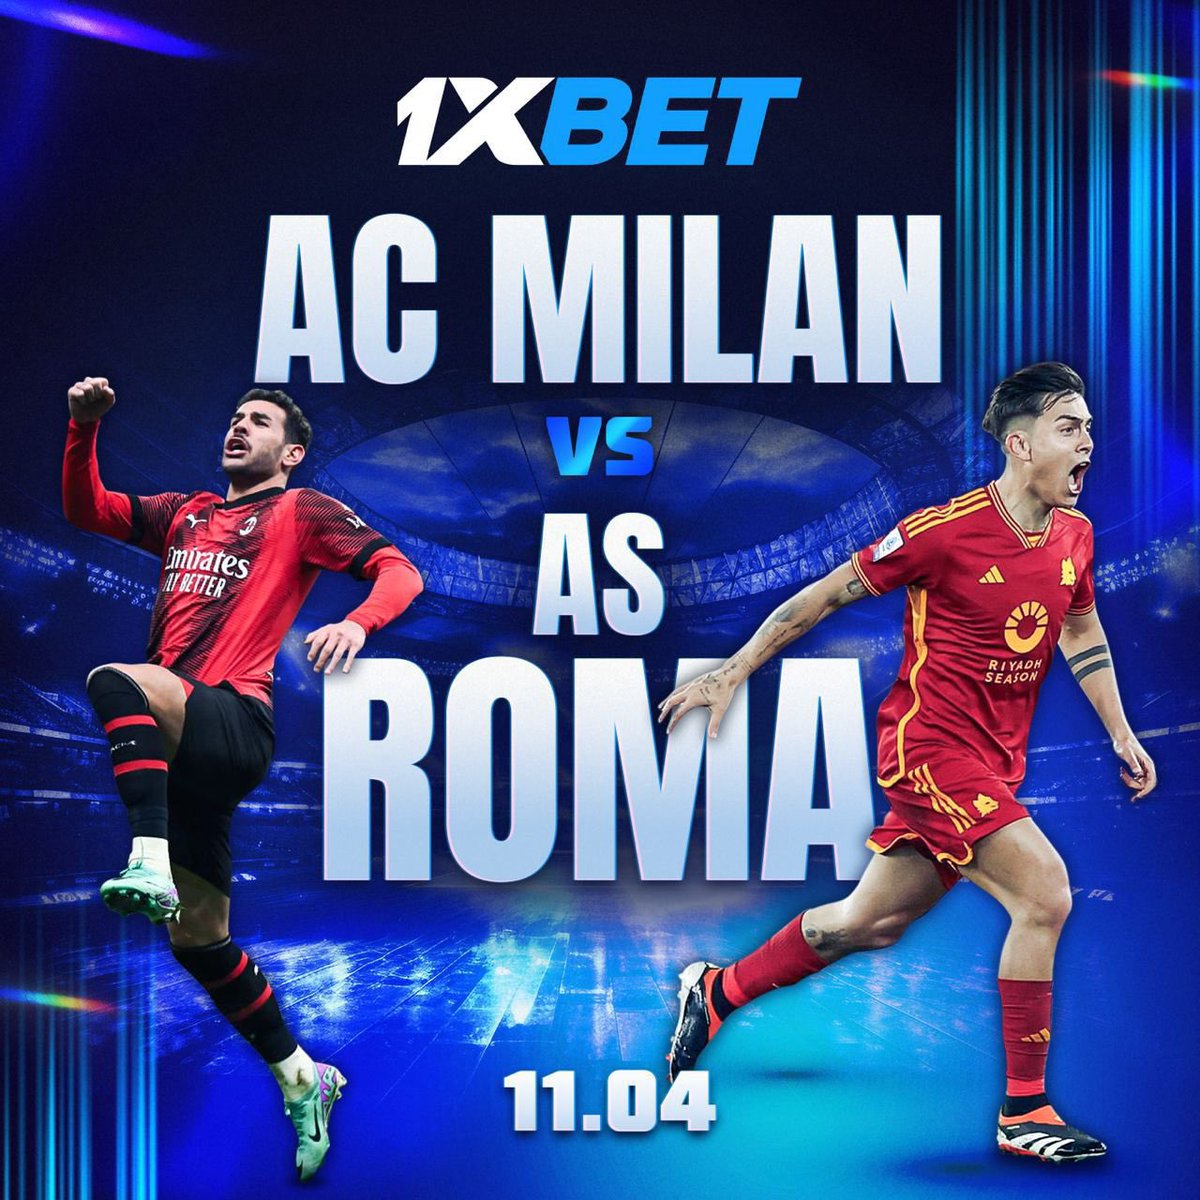 AC Milan Vs Roma

Two Italian titans clash in an epic battle for Europa League semi-final ticket!
Who is your bet on?

Climb Europa League with the reliable bookmaker 1xBet! bit.ly/3eYJEYy

Promo code: OGBRecent1